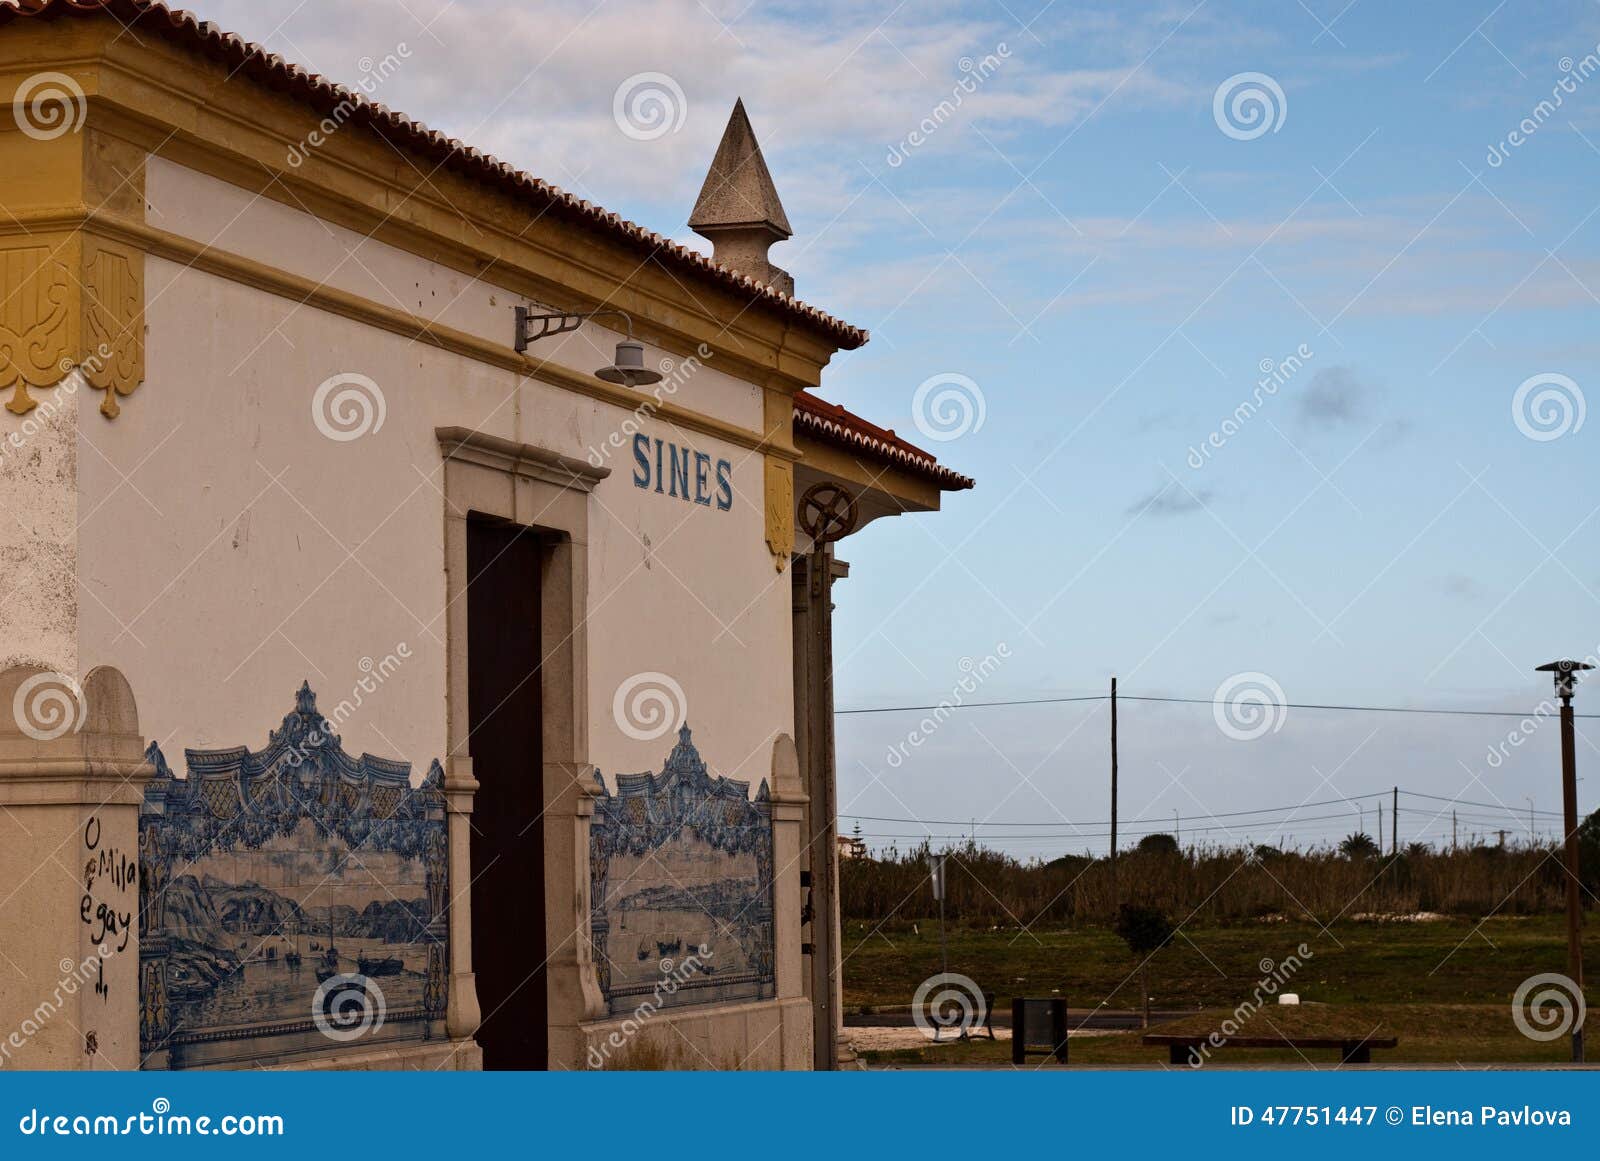 view of train station sines, portugal